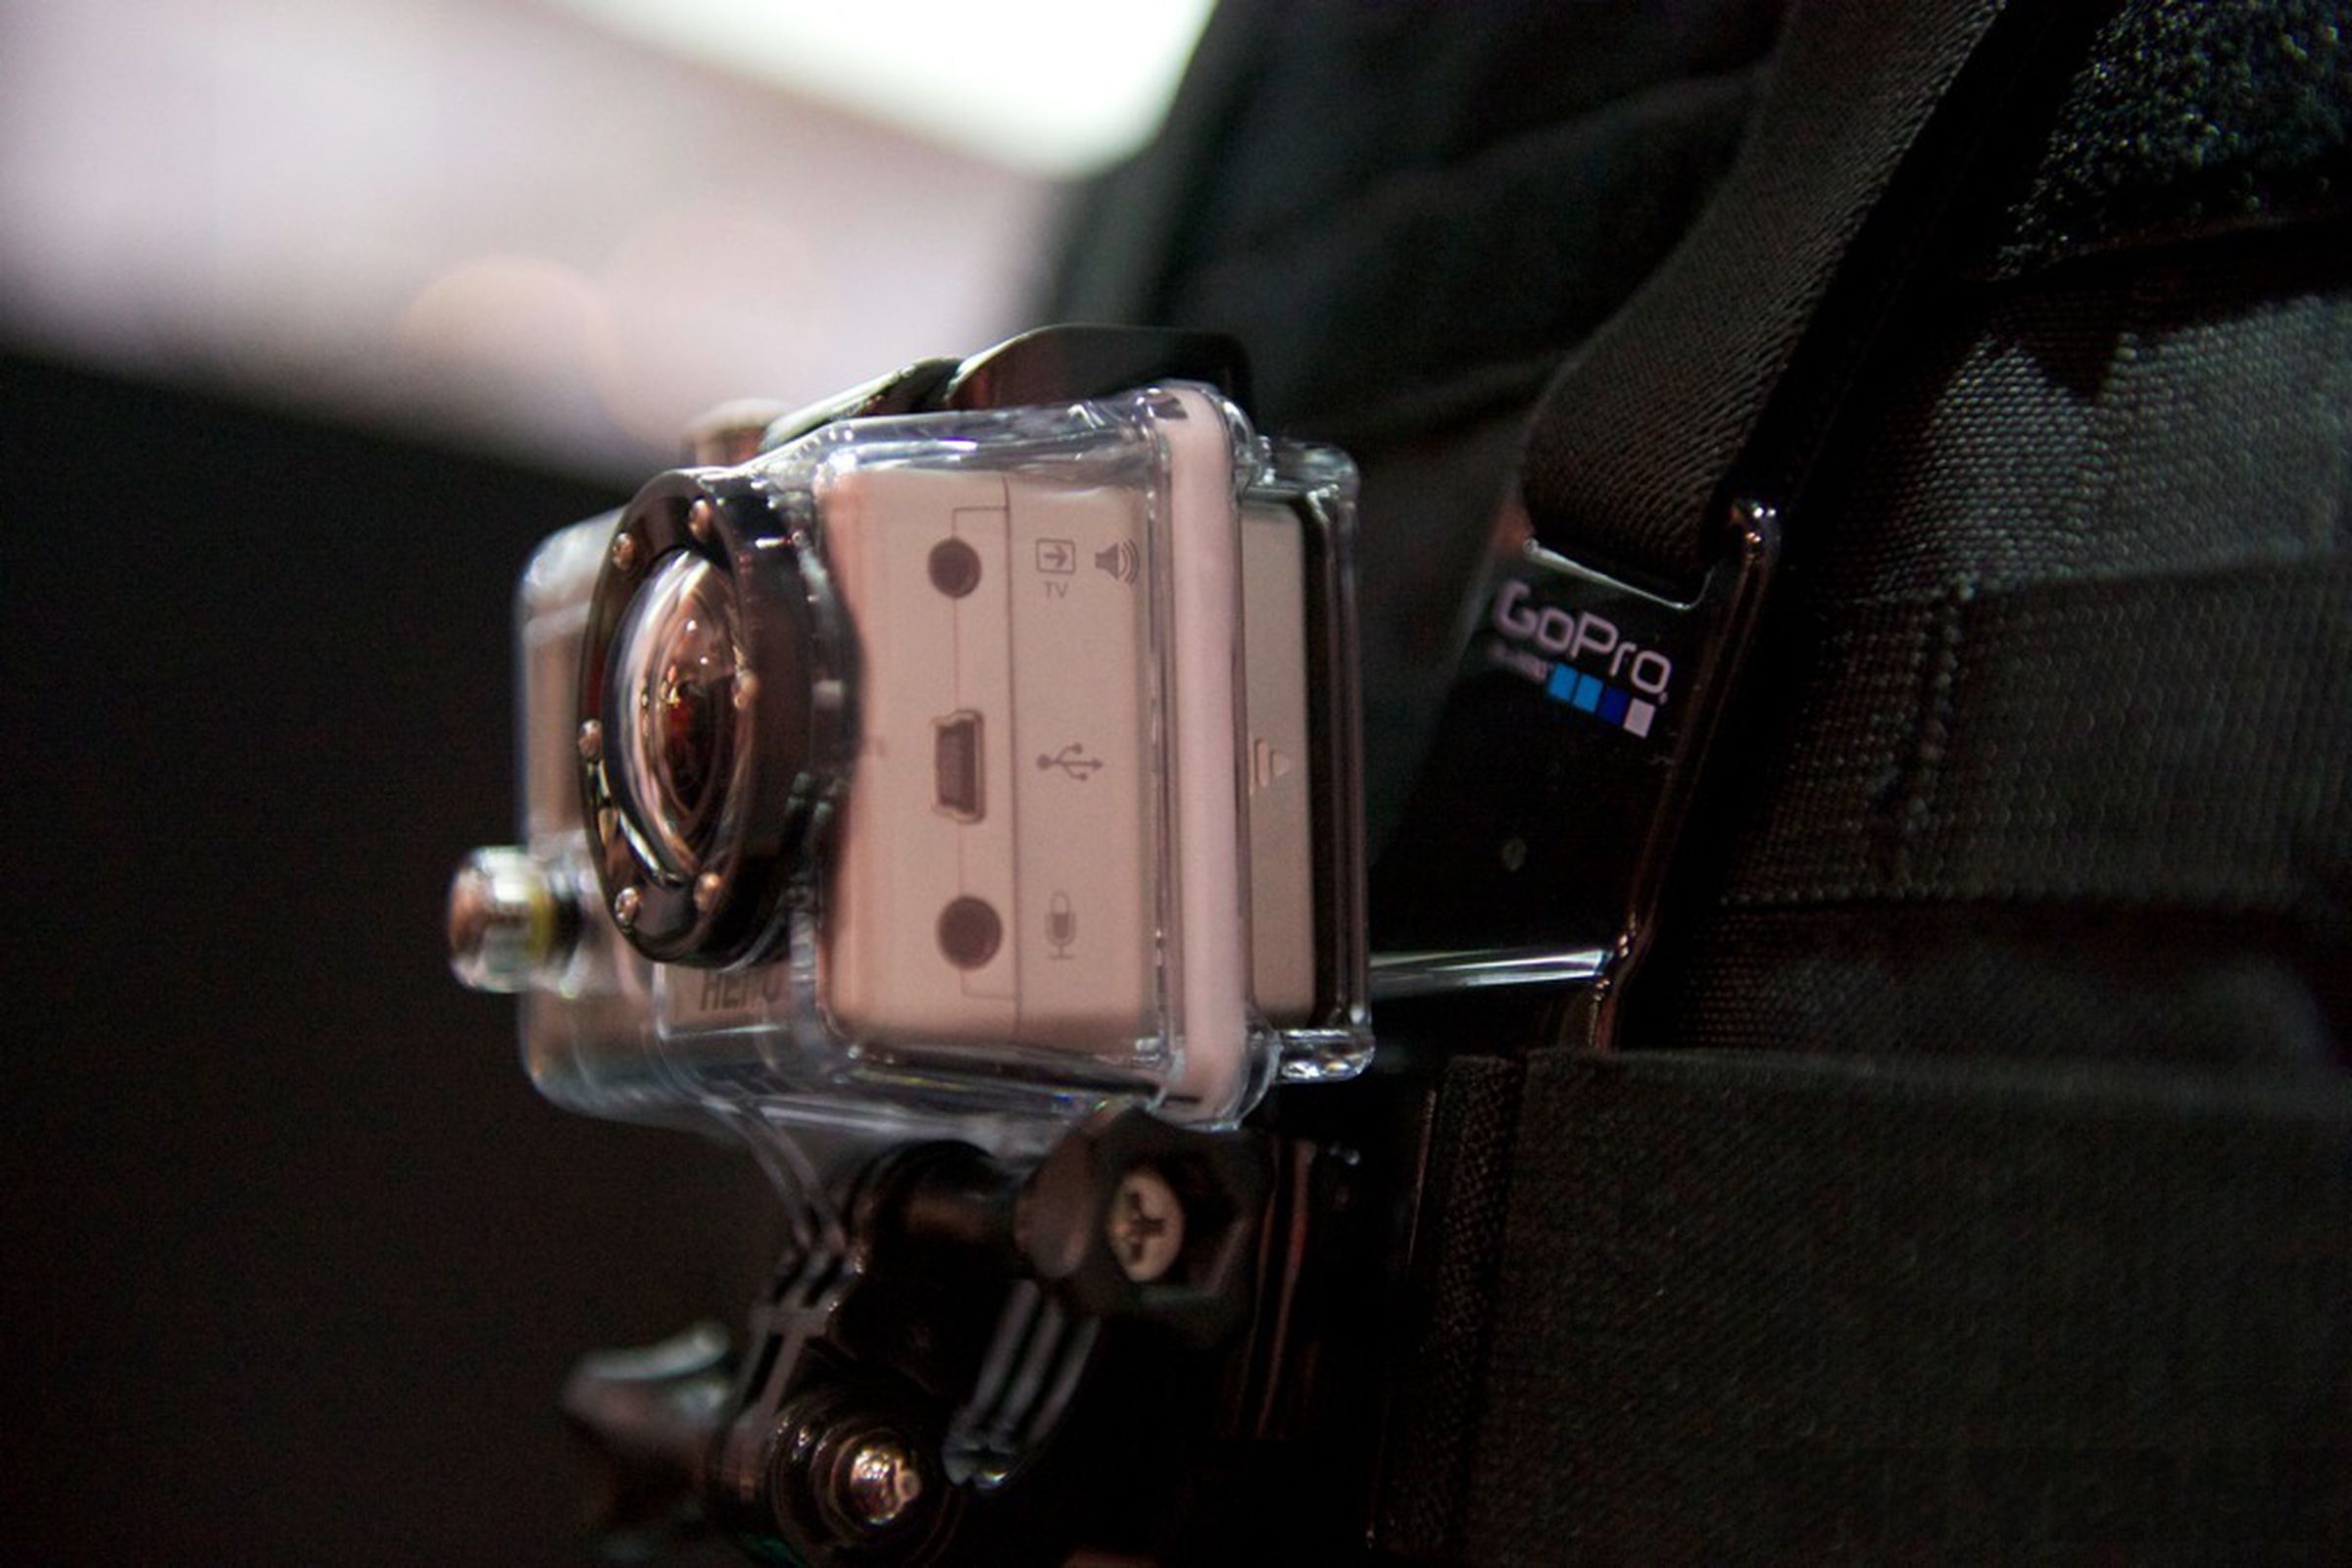 Gallery Photo: GoPro Wi-Fi BacPac hands-on pictures